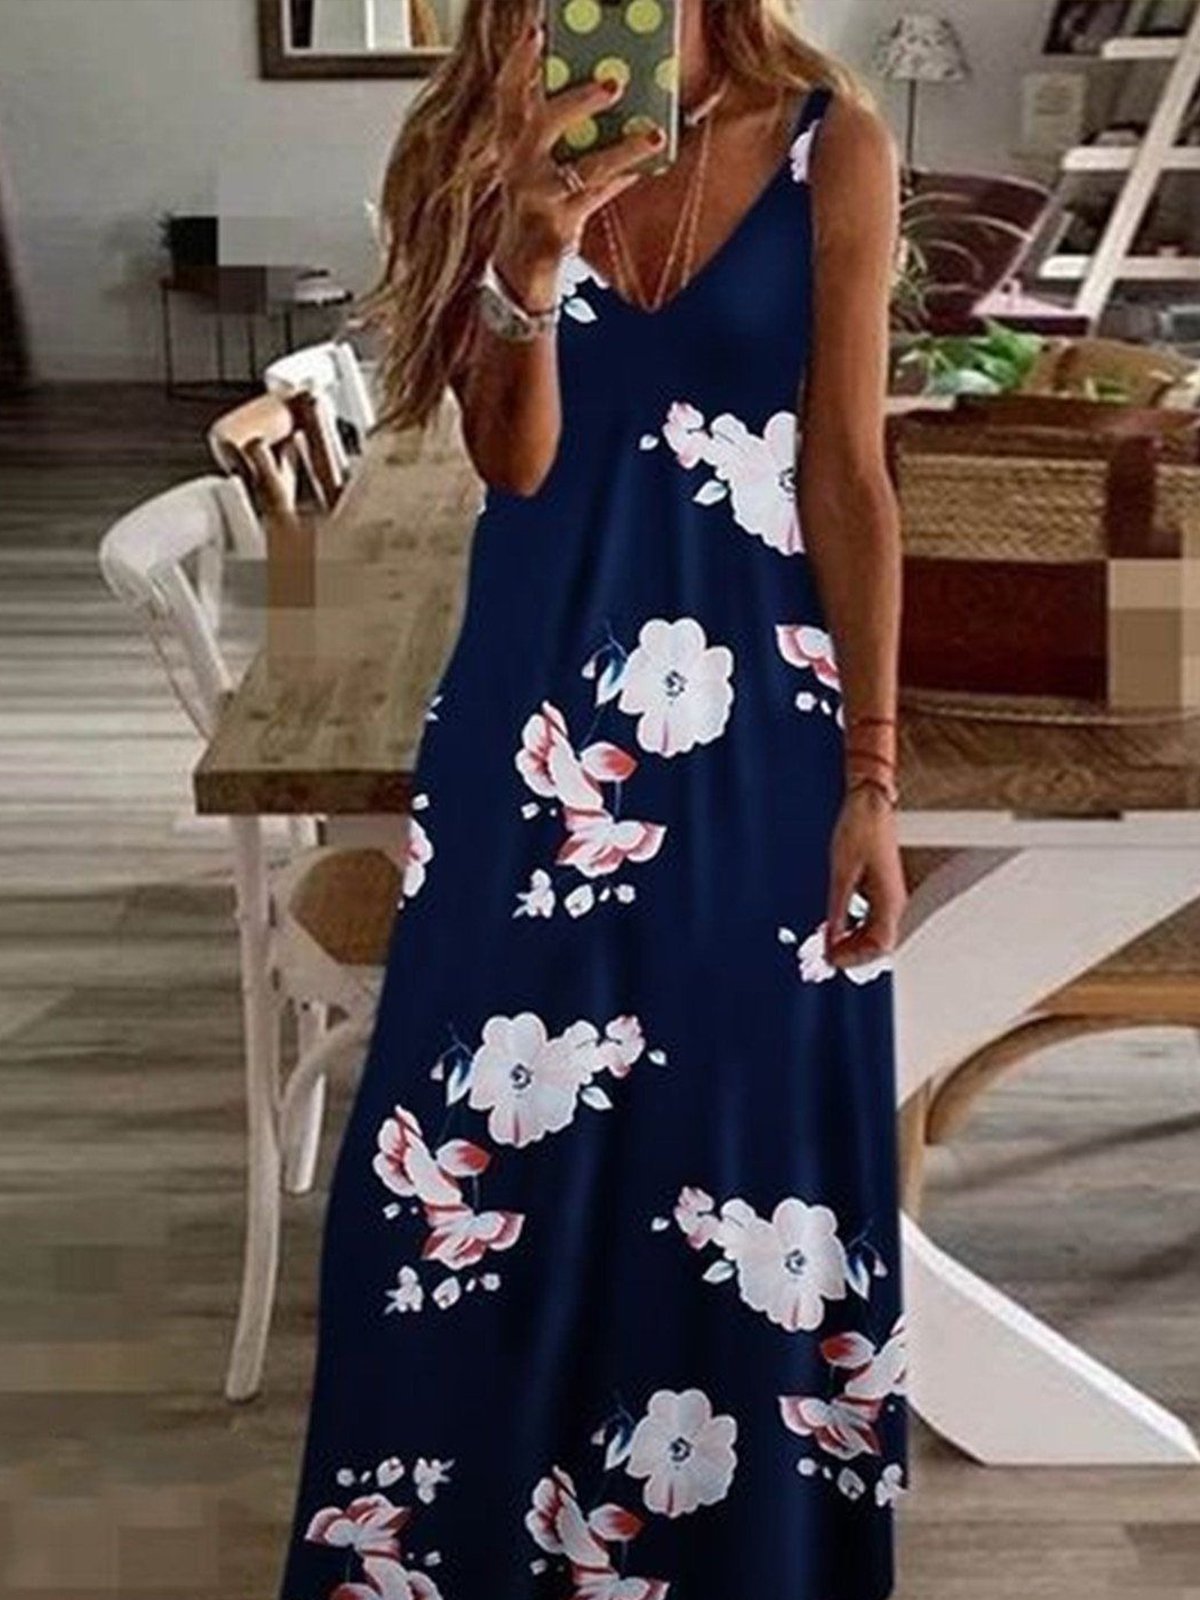 Floral dress with suspenders